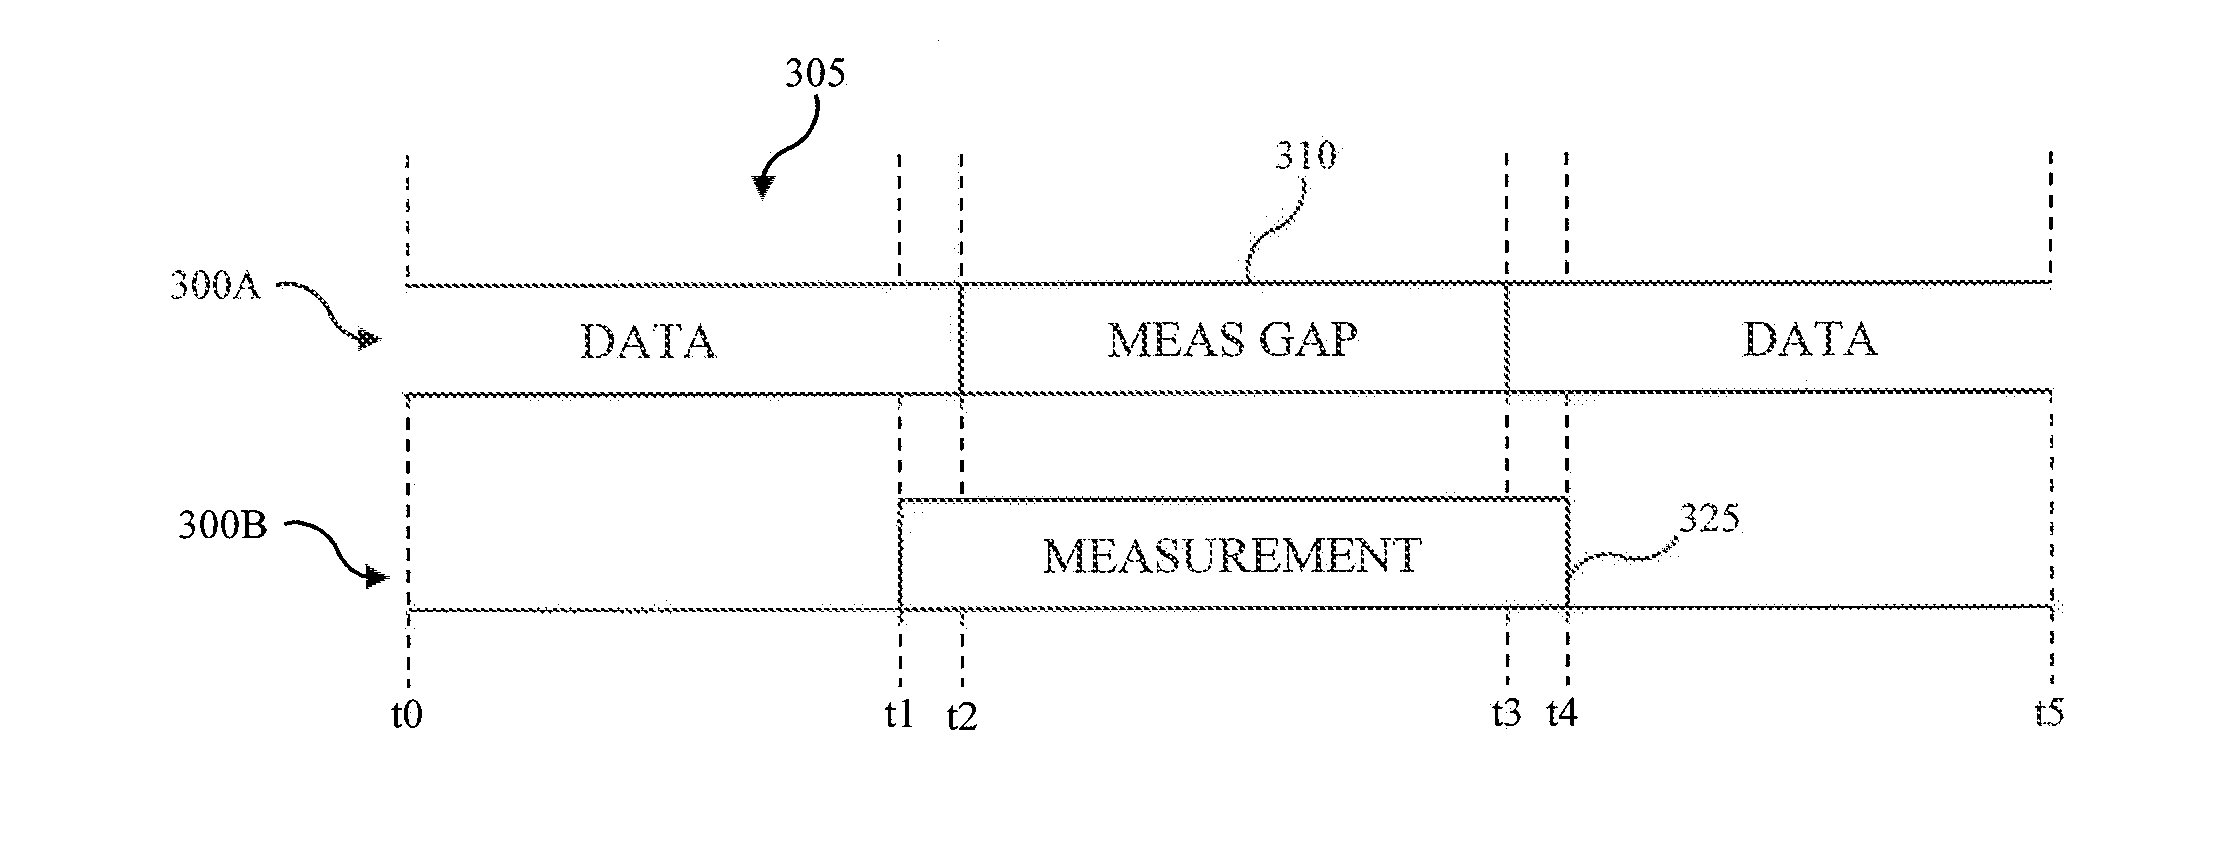 Wireless communication device capable of efficient radio access technology measurements